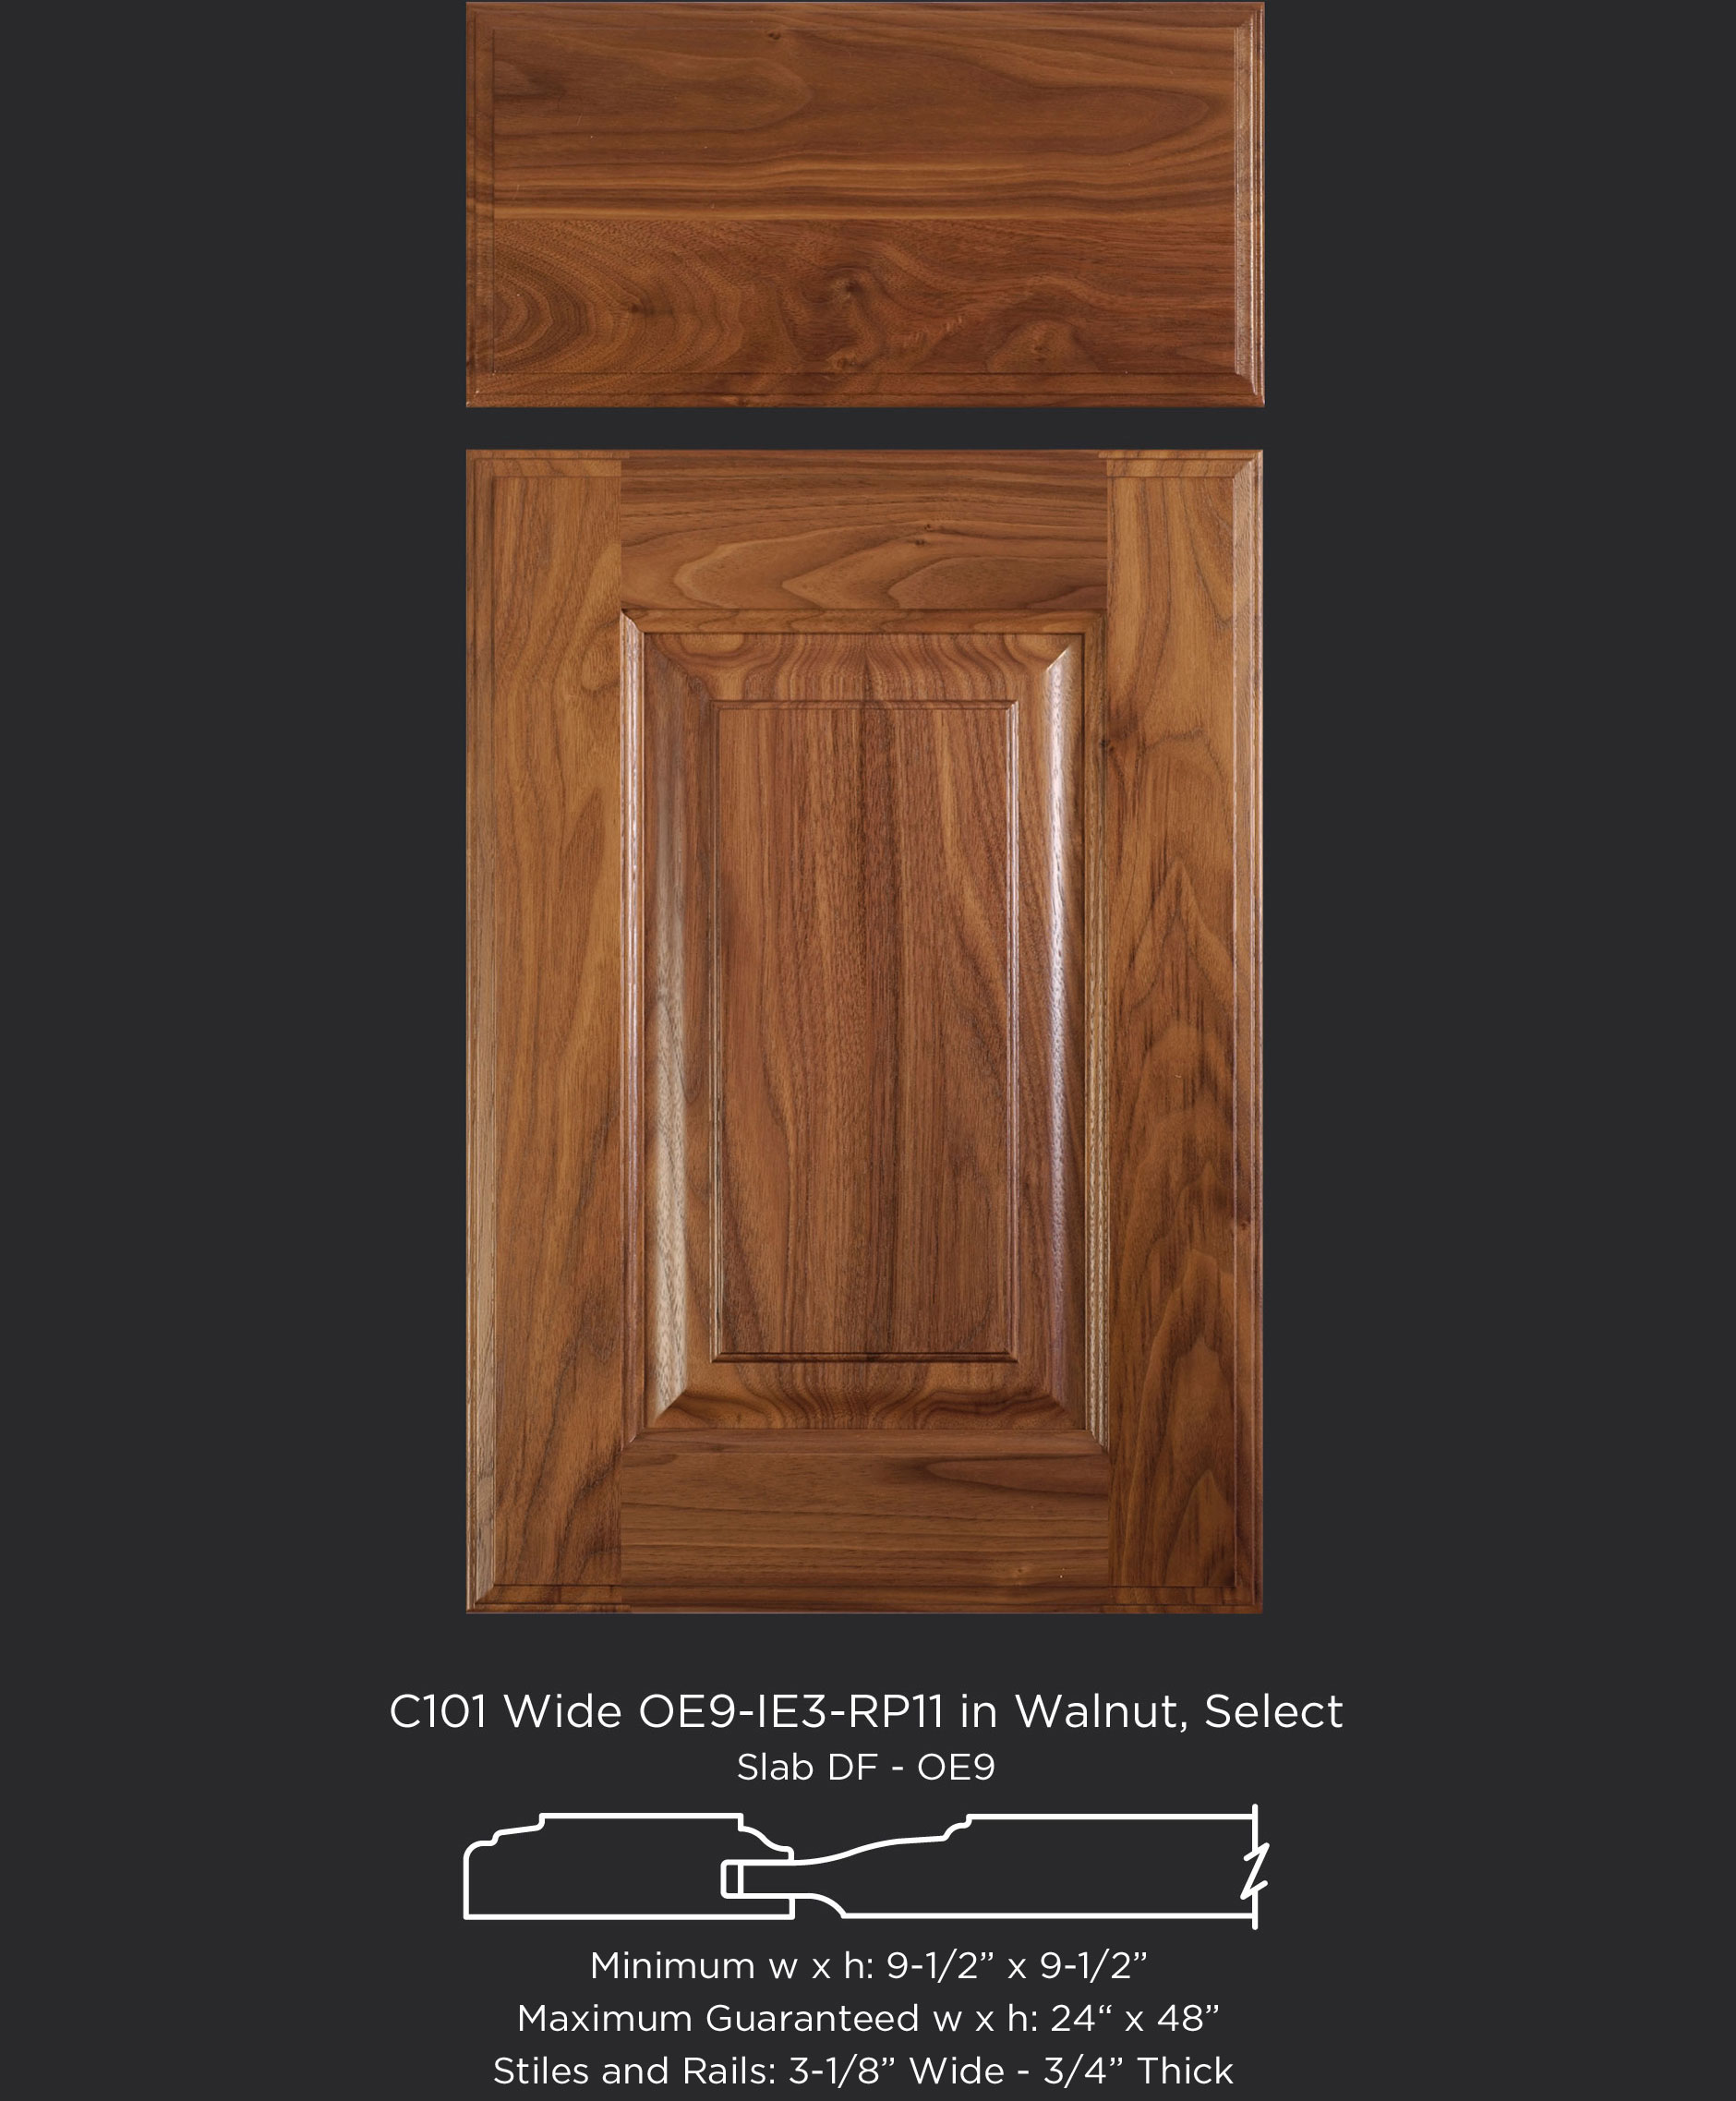 Cope and Stick Cabinet Door C101 Wide OE9-IE3-RP11 in Walnut, Select - Slab drawer front with OE9